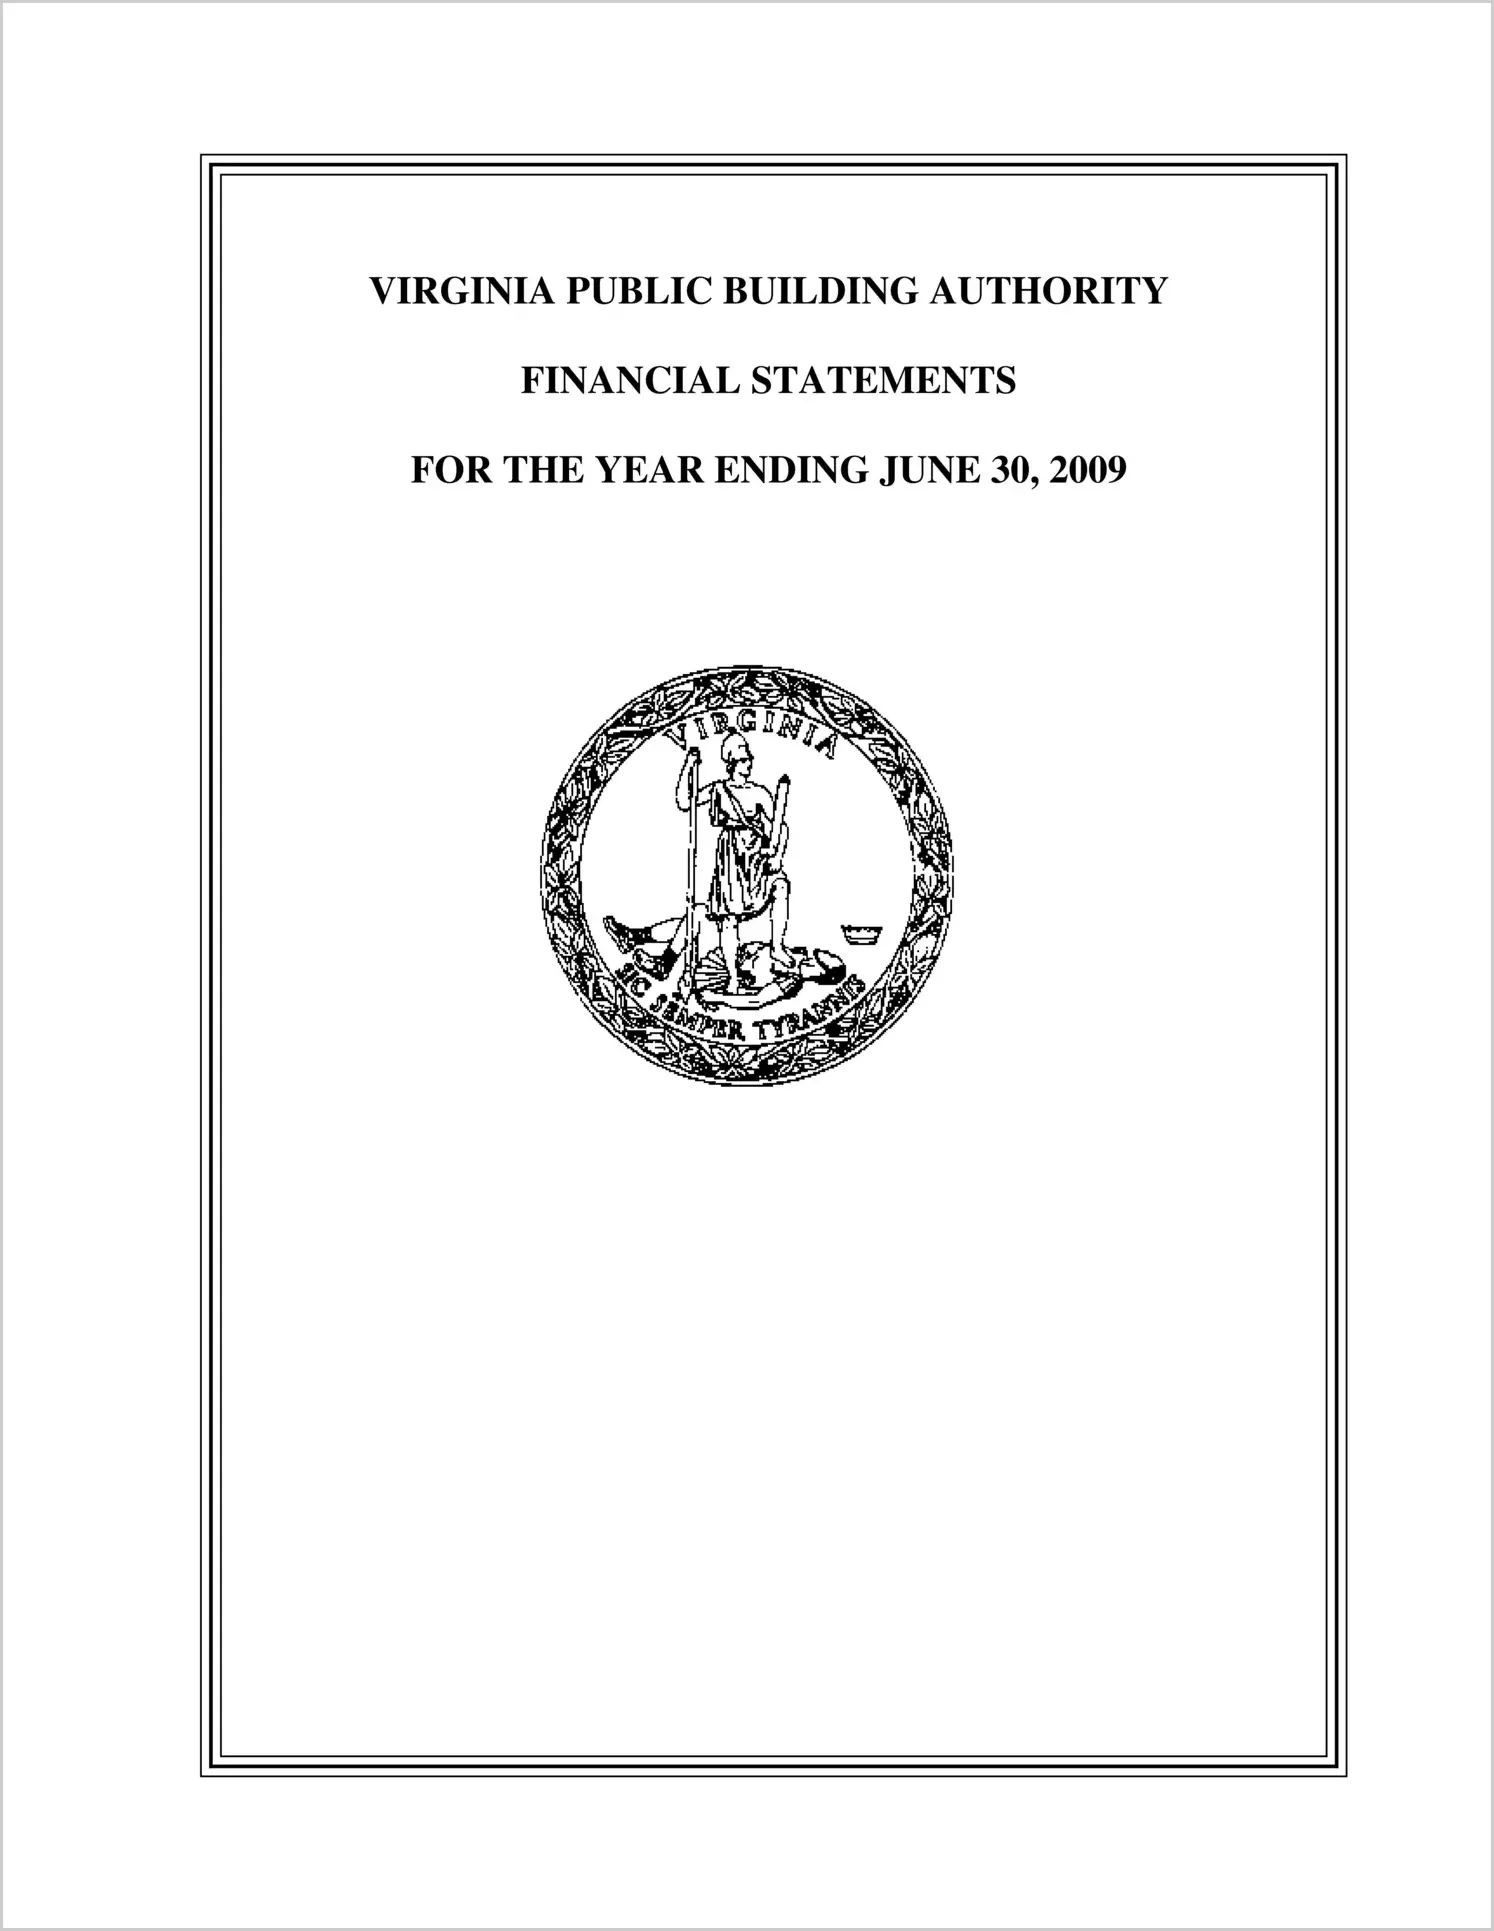 Virginia Public Building Authority Financial Statements for the year ended June 30, 2009